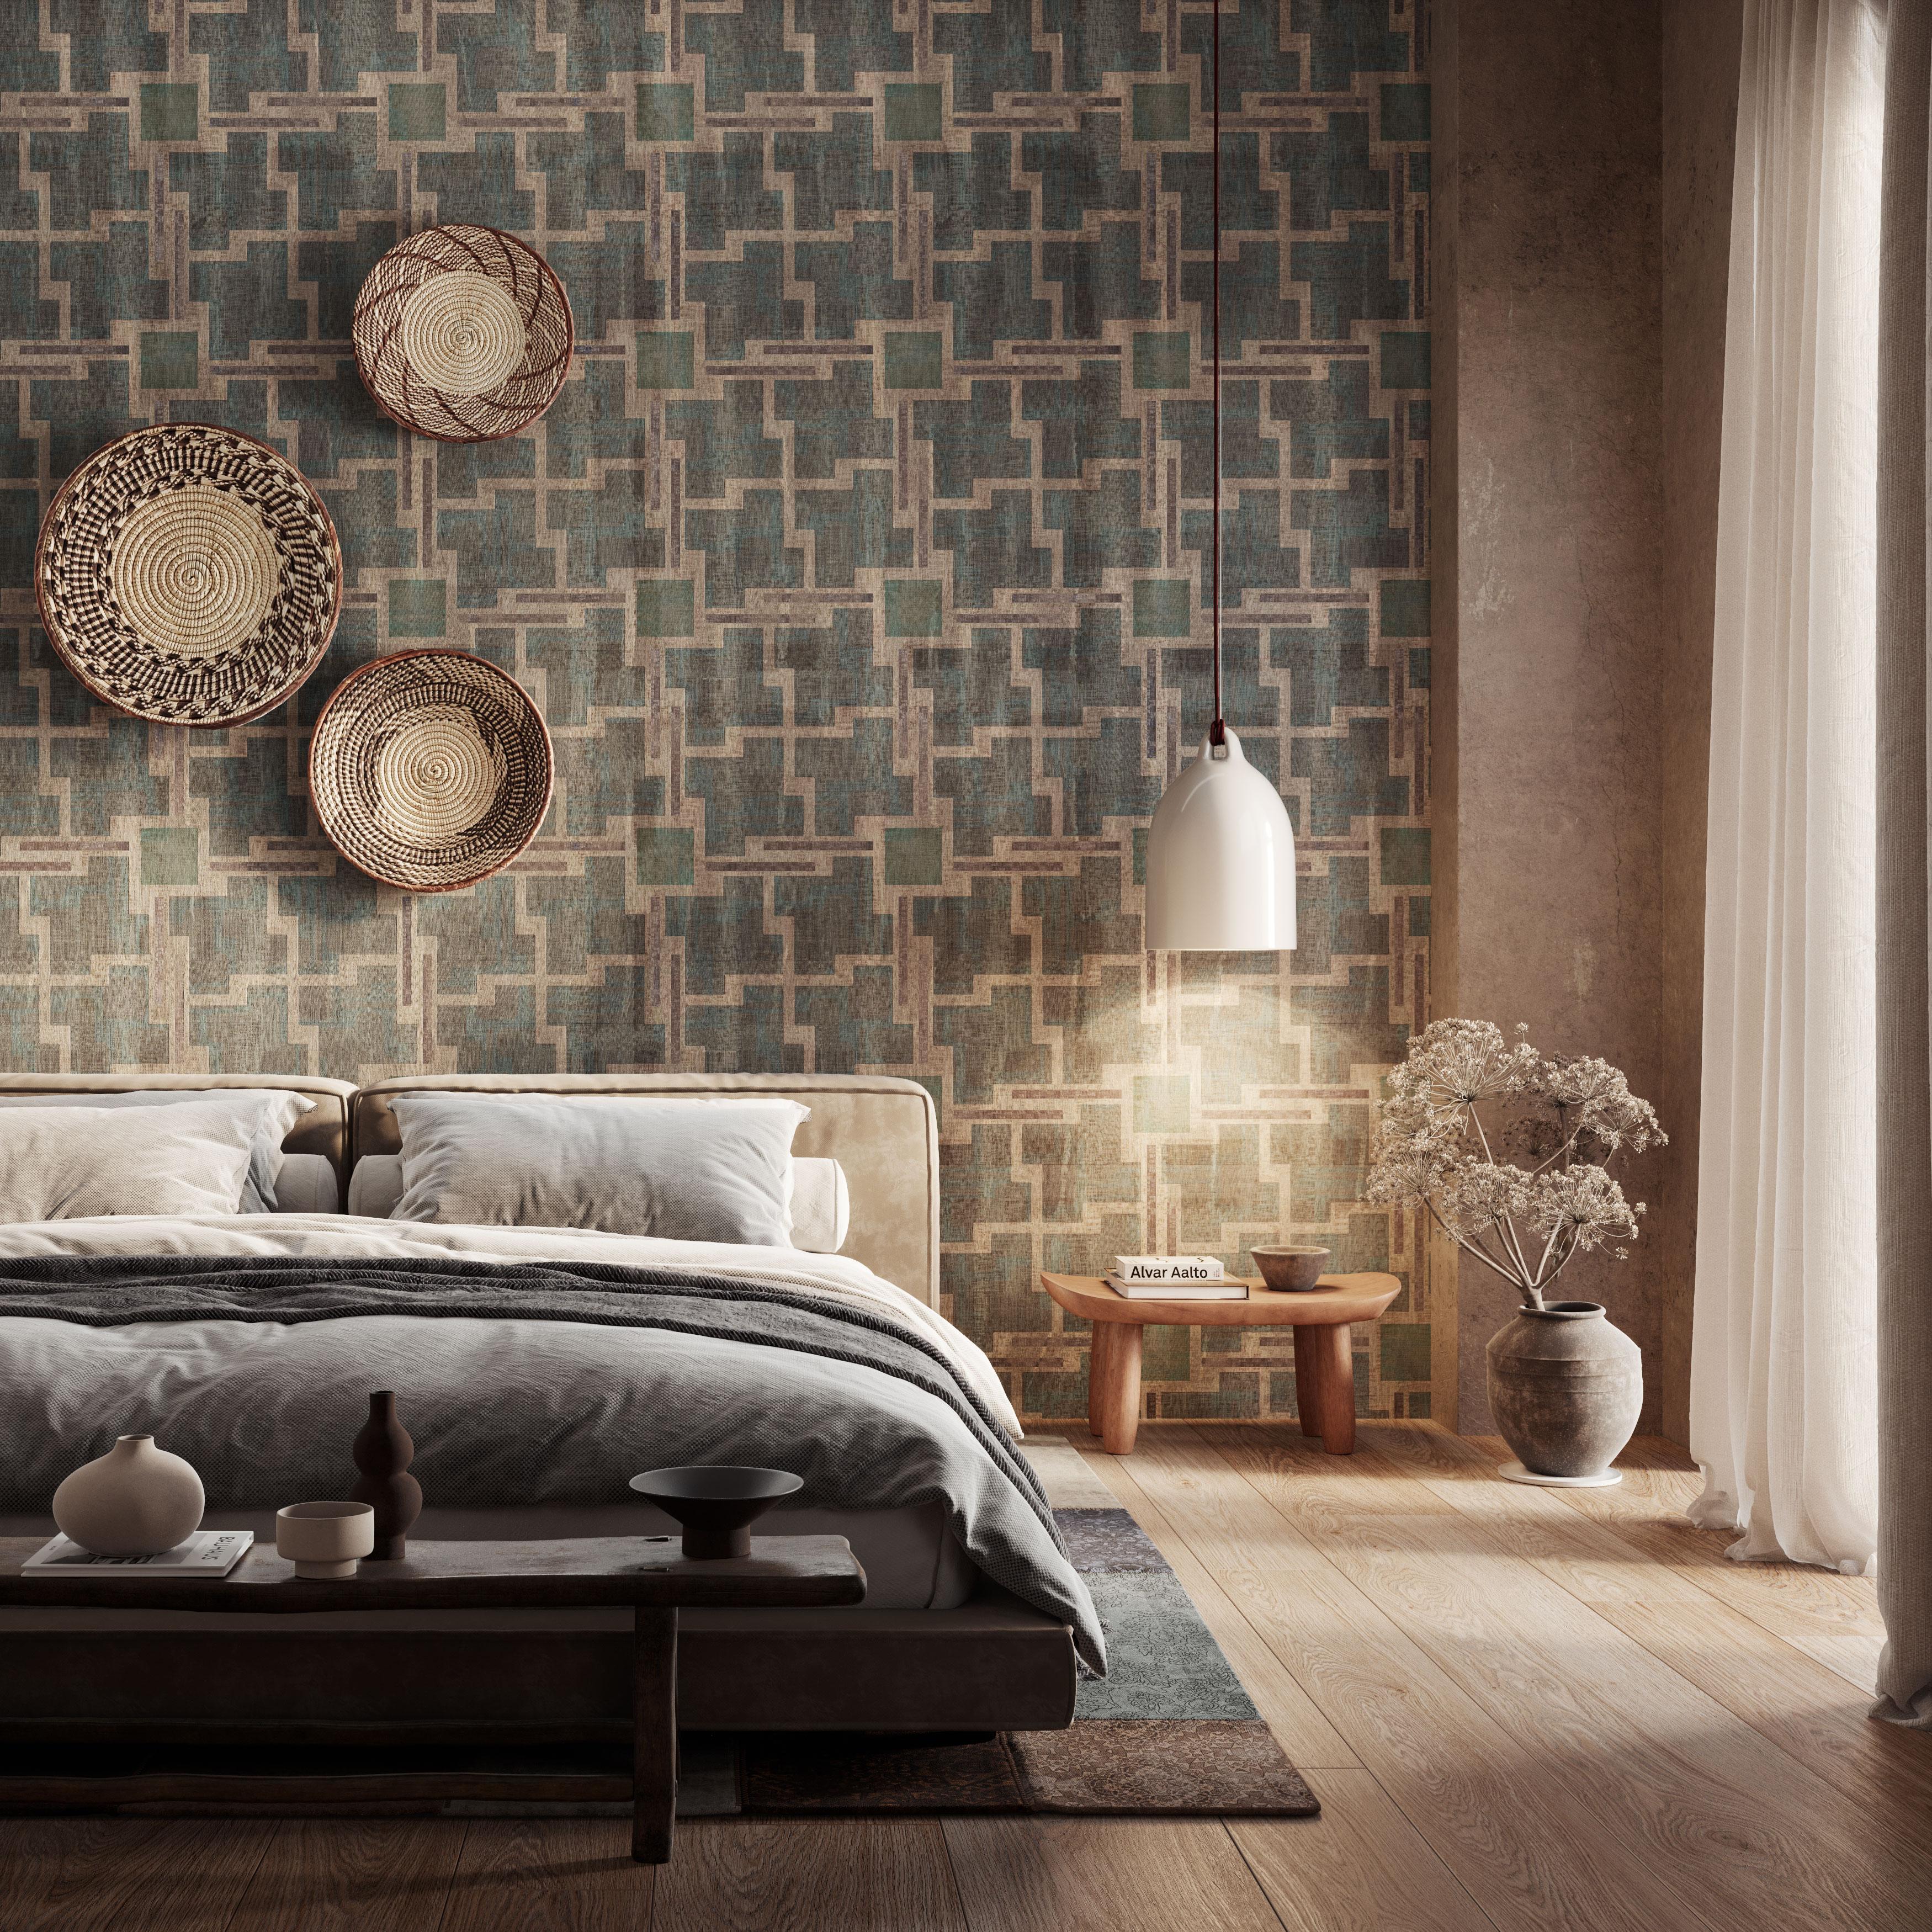 Italian Ornami Africa Geometric Tradition Vinyl Wallpaper Made in Italy Digital Printing For Sale